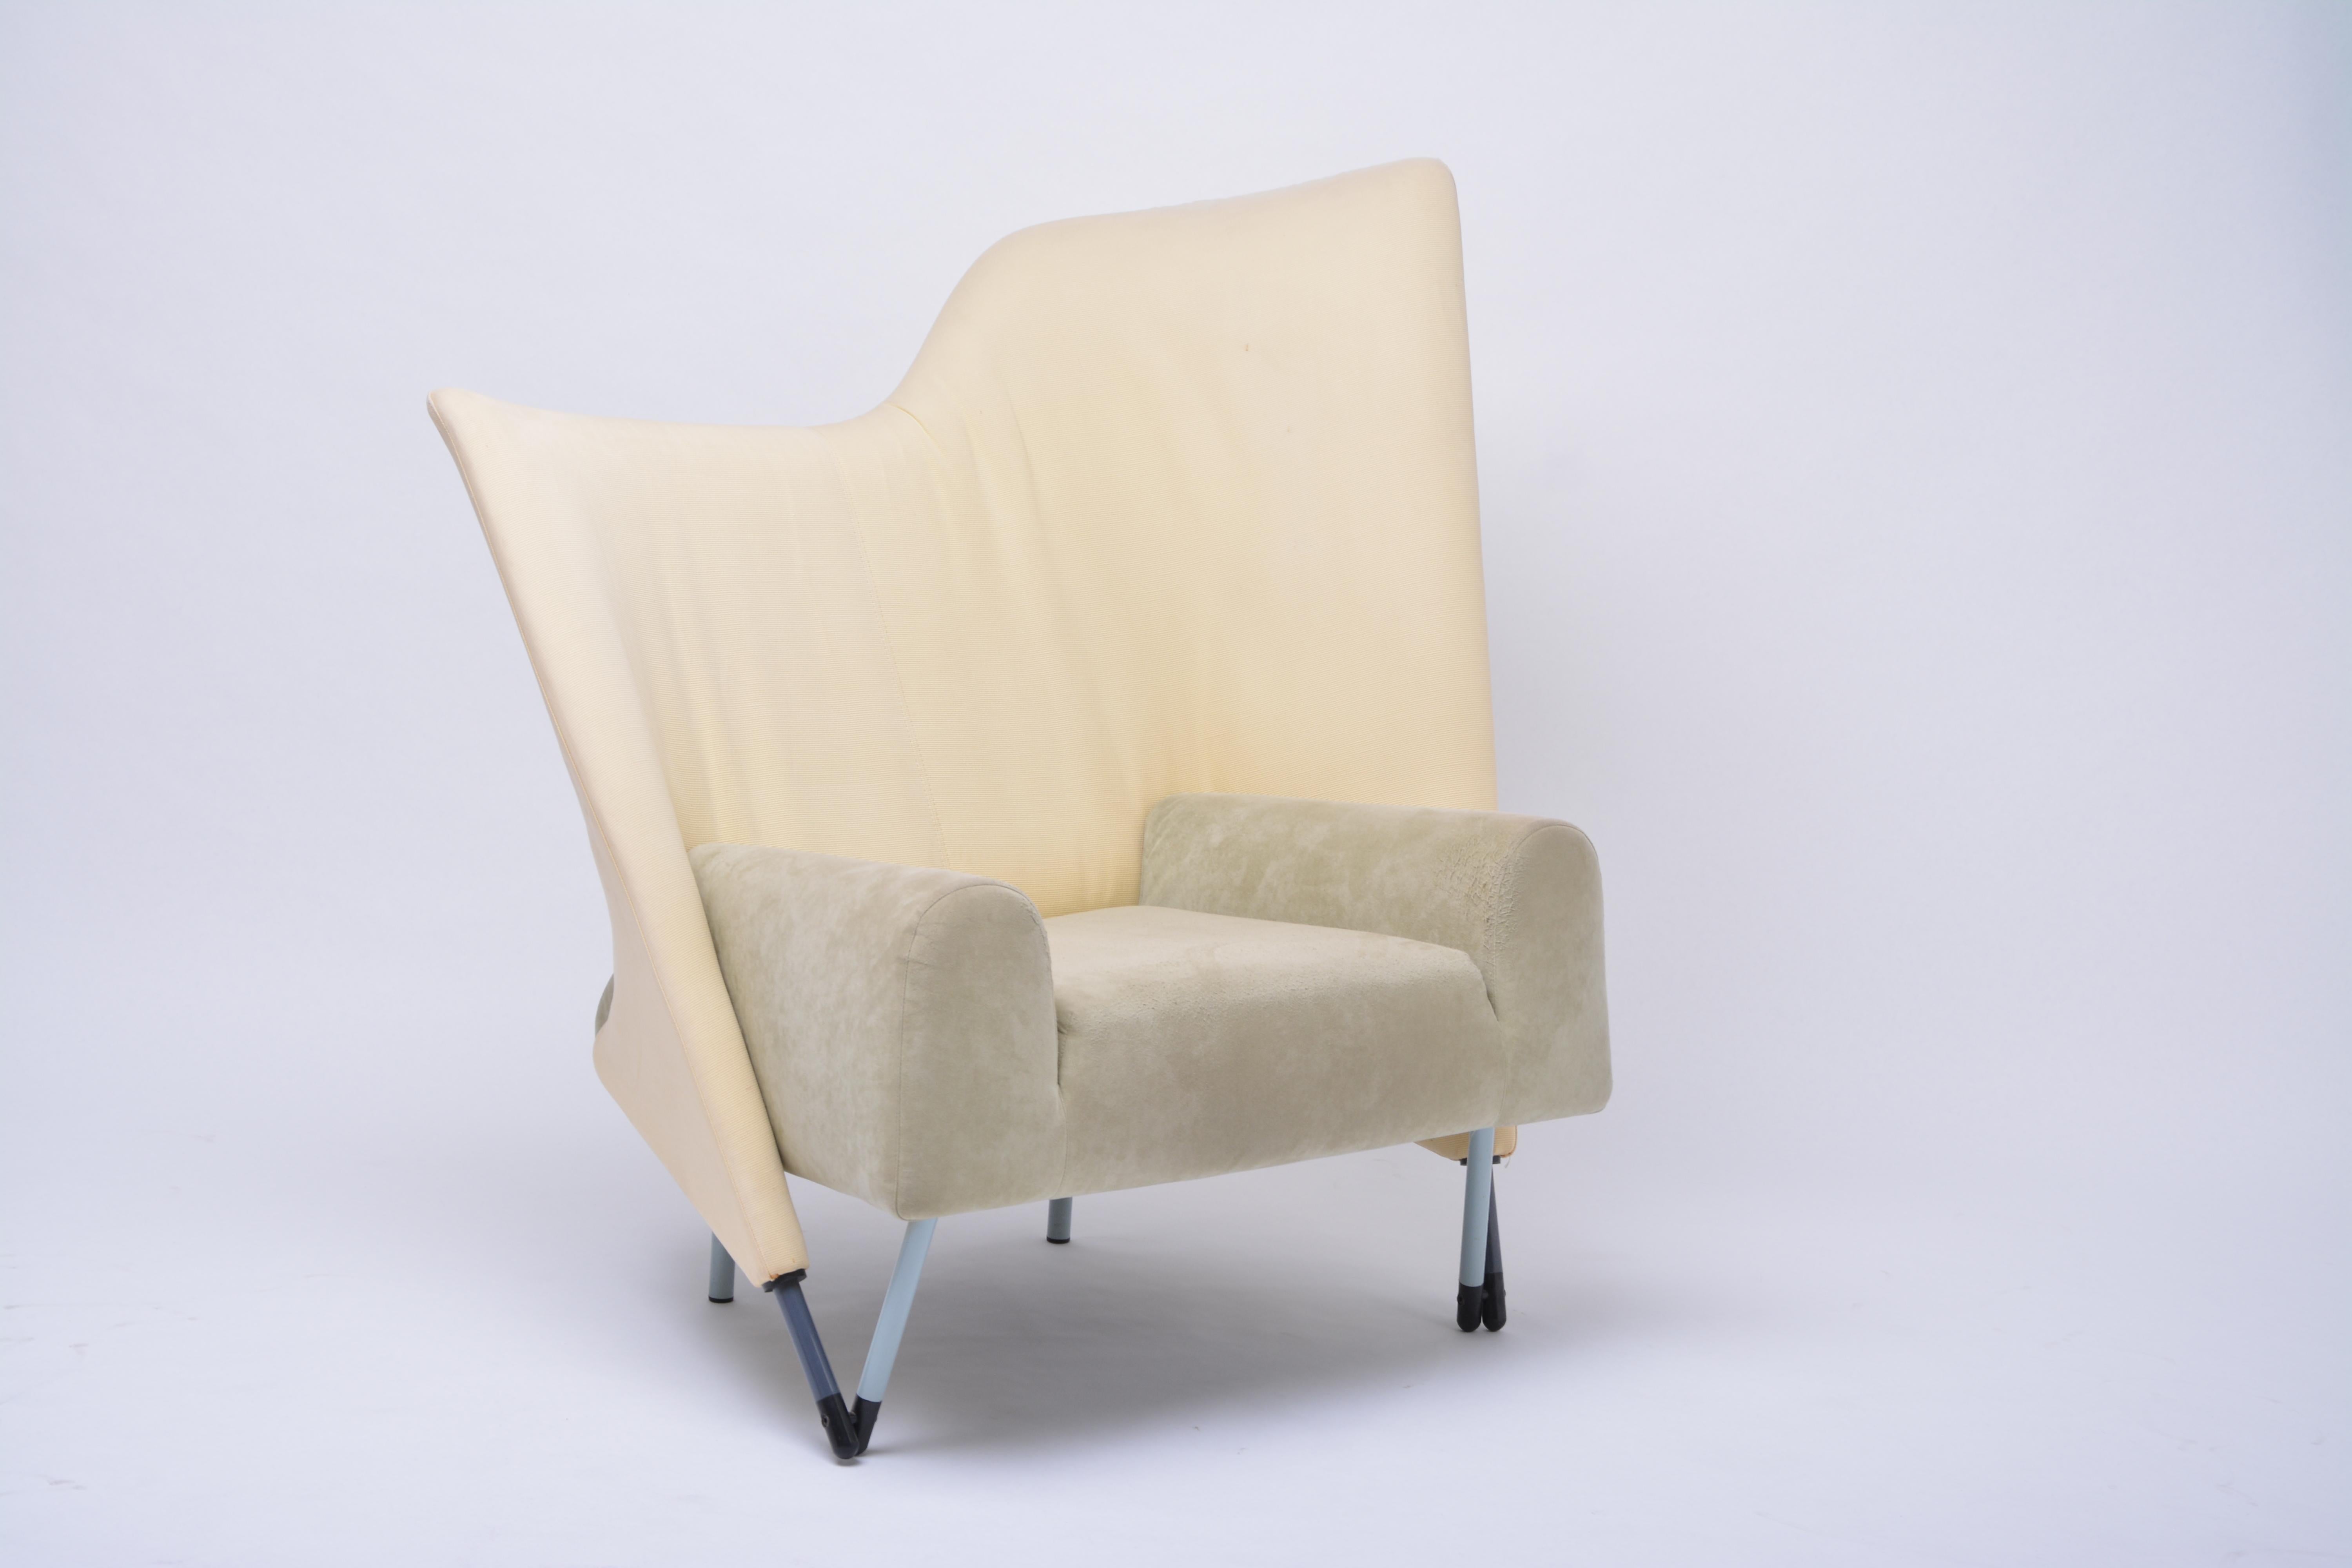 Spectacular Postmodern asymmetric armchair by Italian designer Paolo Deganello for Cassina in 1982. The chair is made of a steel skeletal frame, padded with CFC-free polyurethane foam and polyester padding. Upholstered in two different fabrics.